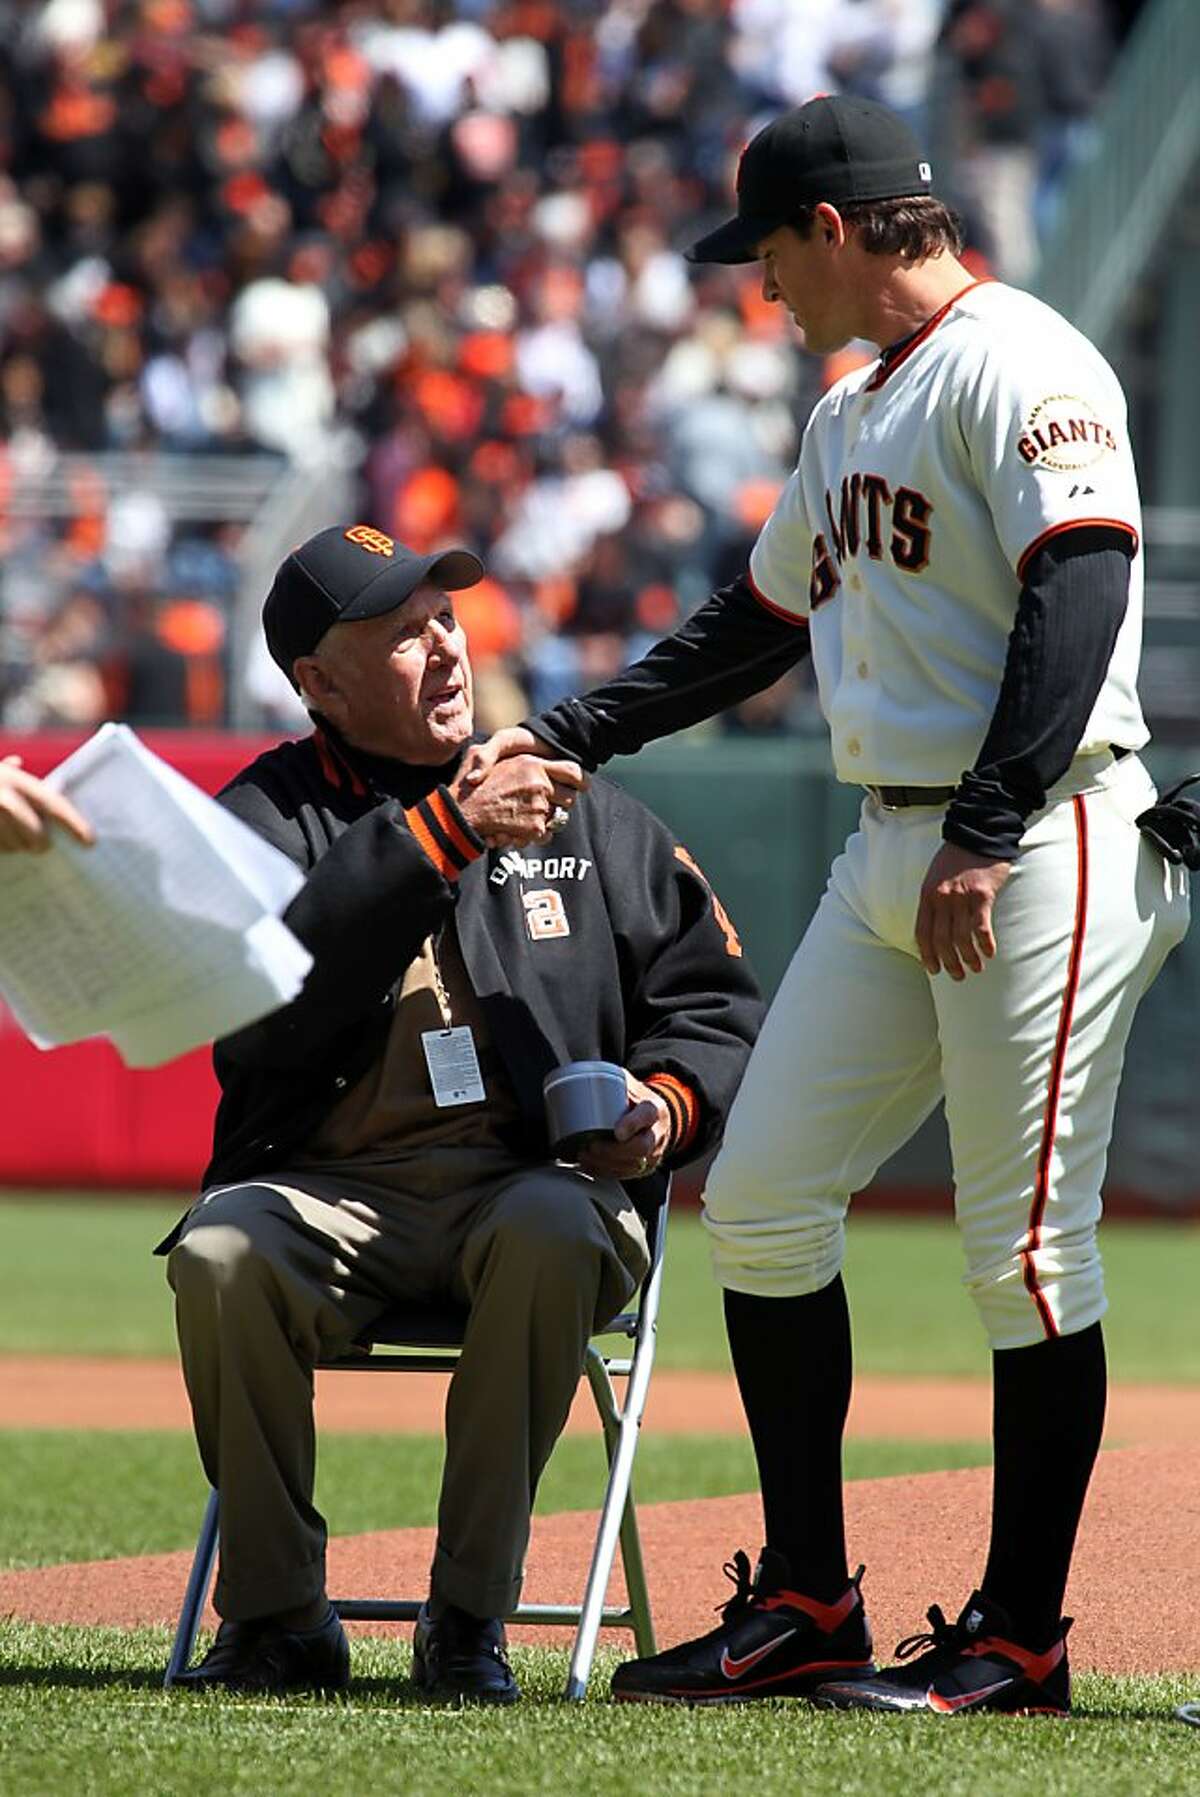 San Francisco Giants great Jim Davenport, seated, former third baseman and baseball manager, shakes hands with Ryan Theriot during a ceremony that honored the New York Giants of old, which won the pennant in 1961-63. The ceremony took place prior to the opening Day baseball game between the Giants and the Pittsburgh Pirates in San Francisco, Friday, April 13, 2012.